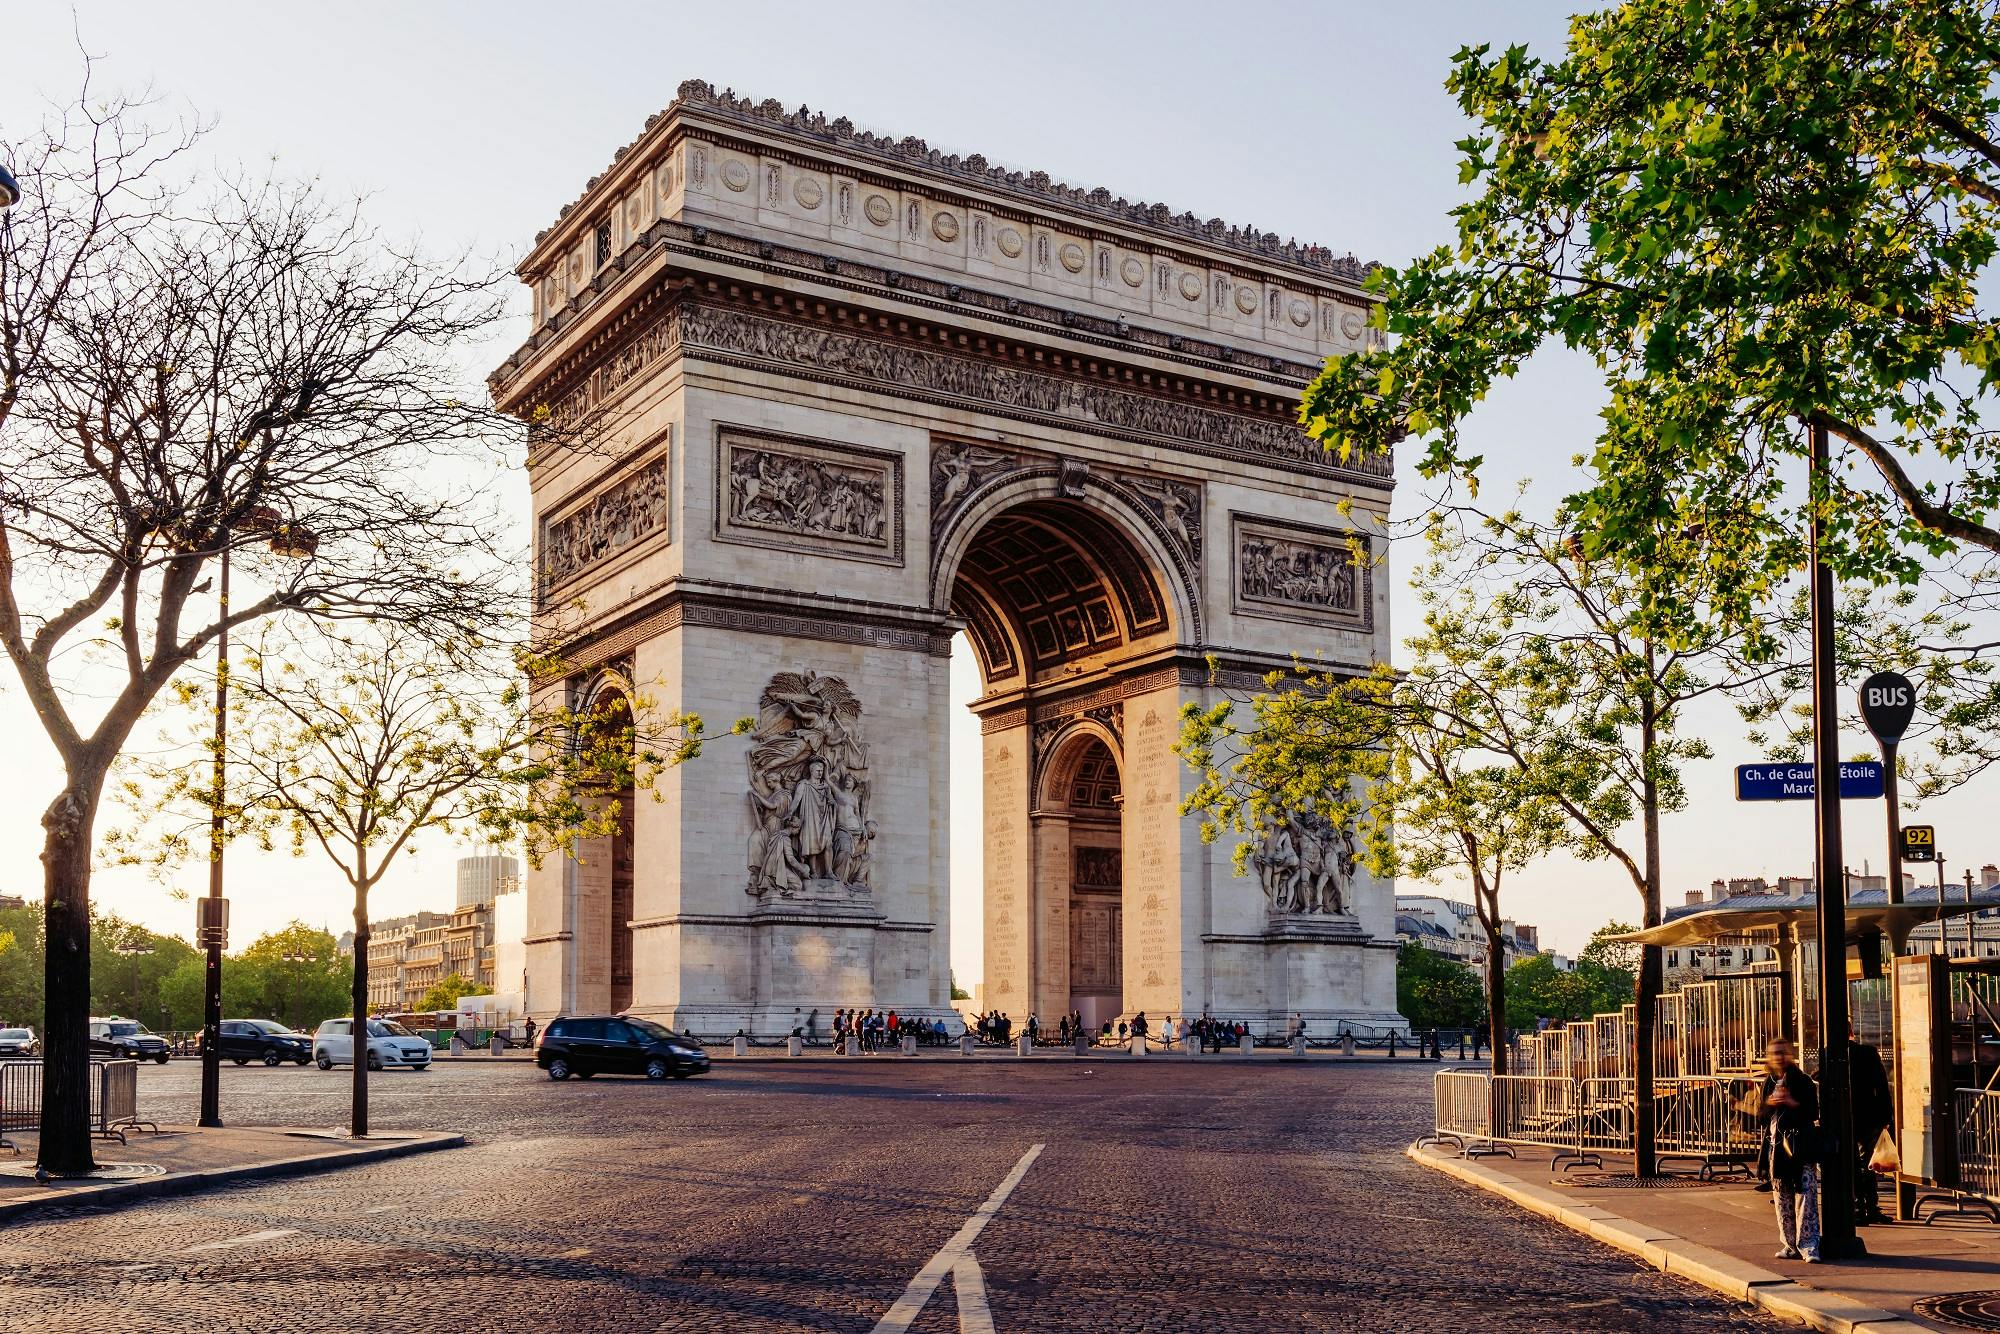 Combo tickets for hop-on hop-off bus tour,  Arc de Triomphe and river cruise